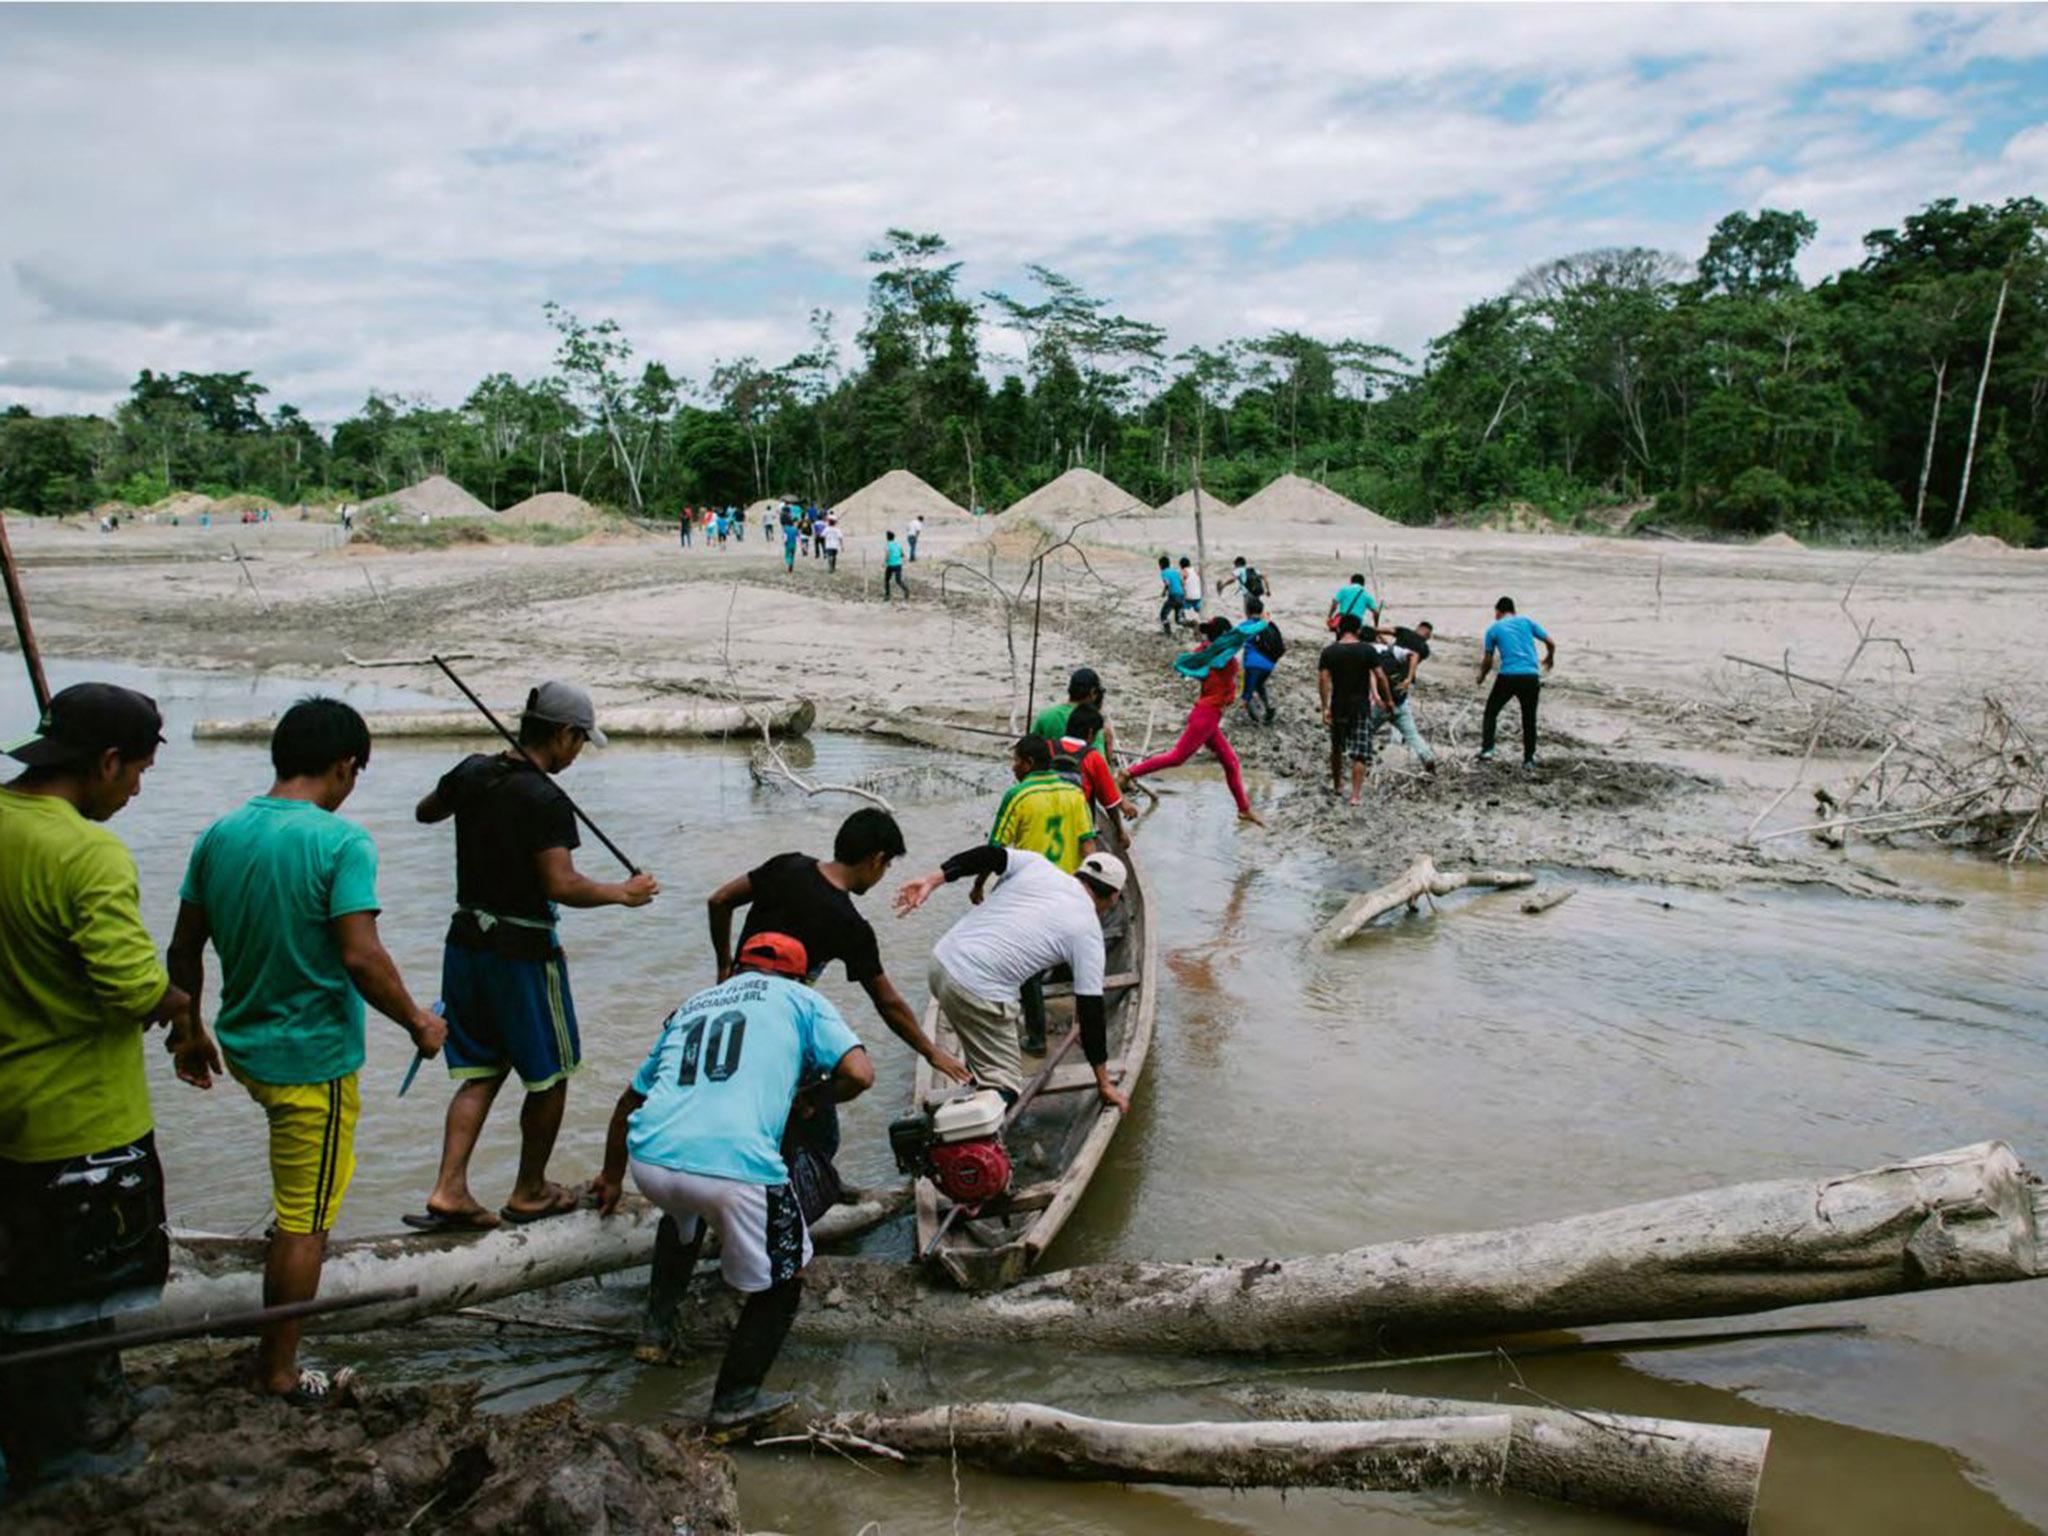 &#13;
Members of the Wampis community arrive at an illegal mining site on the Pastacillo river to protest the miners’ activity (Jacob Balzani Lööv)&#13;